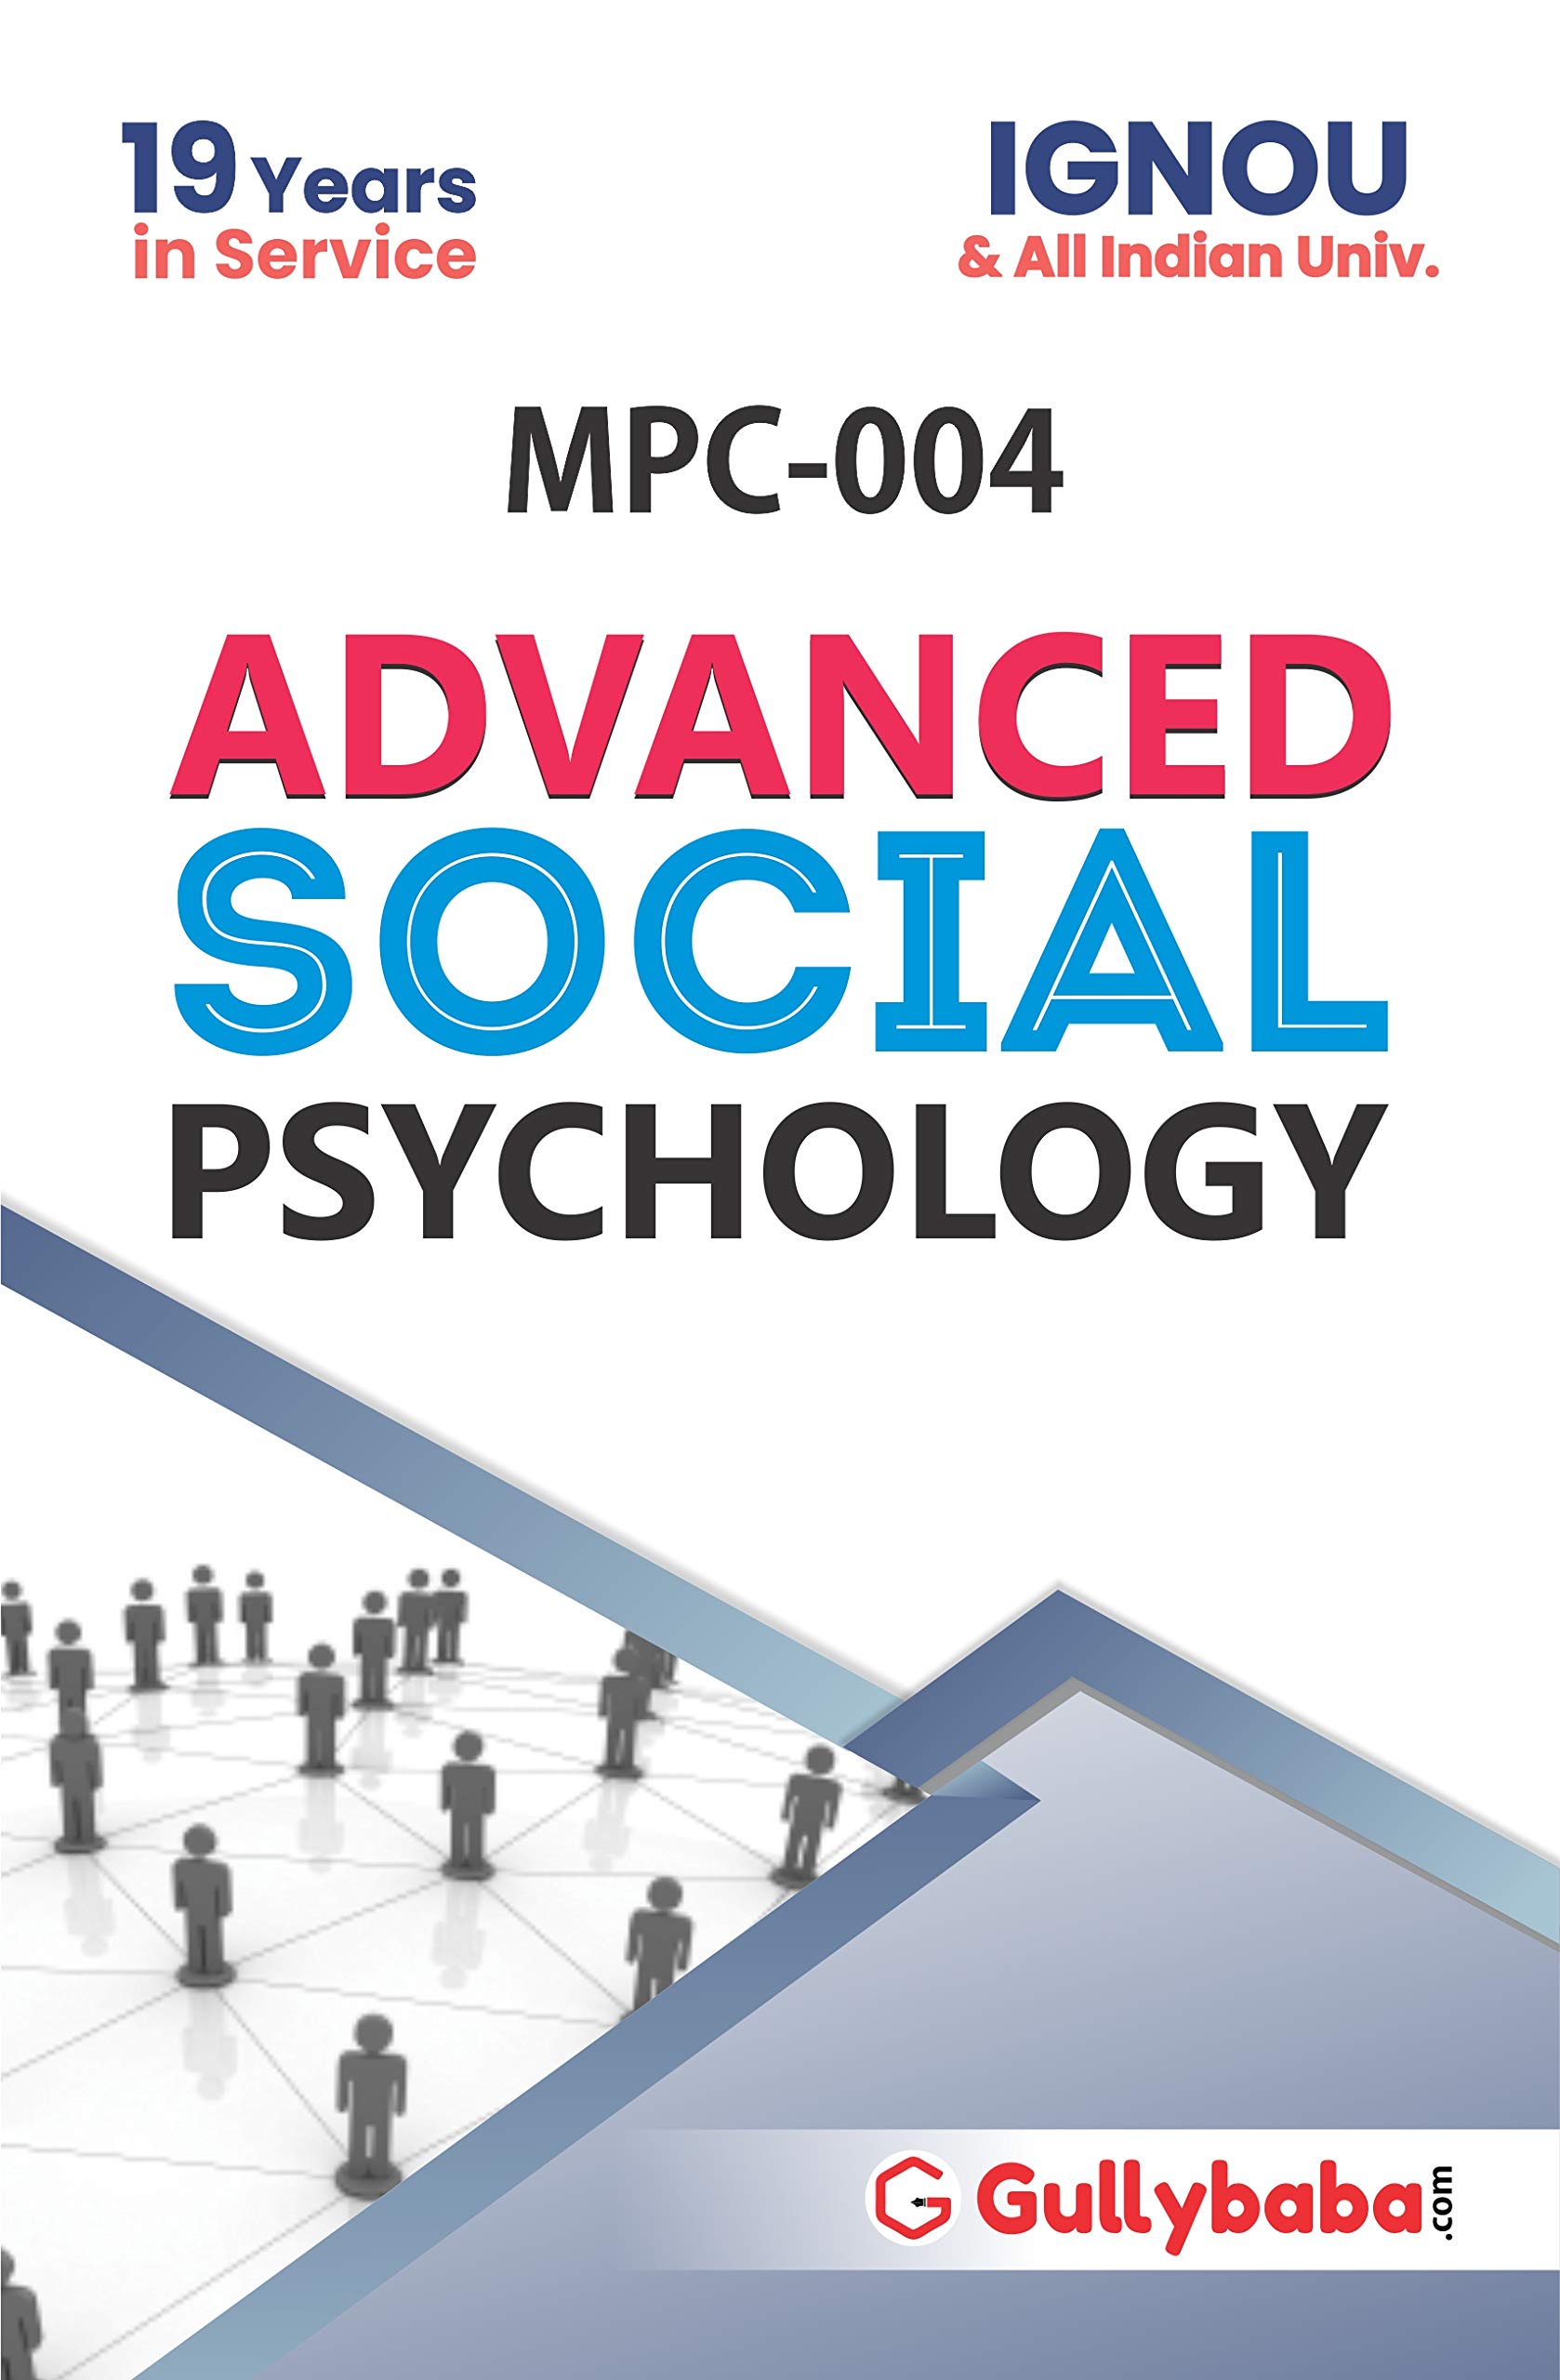 Latest IGNOU 1st Year MA (Latest Edition) MPC-004 Advanced Social Psychology IGNOU Help Book with Solved Previous Years’ Question Papers and Important Exam Notes